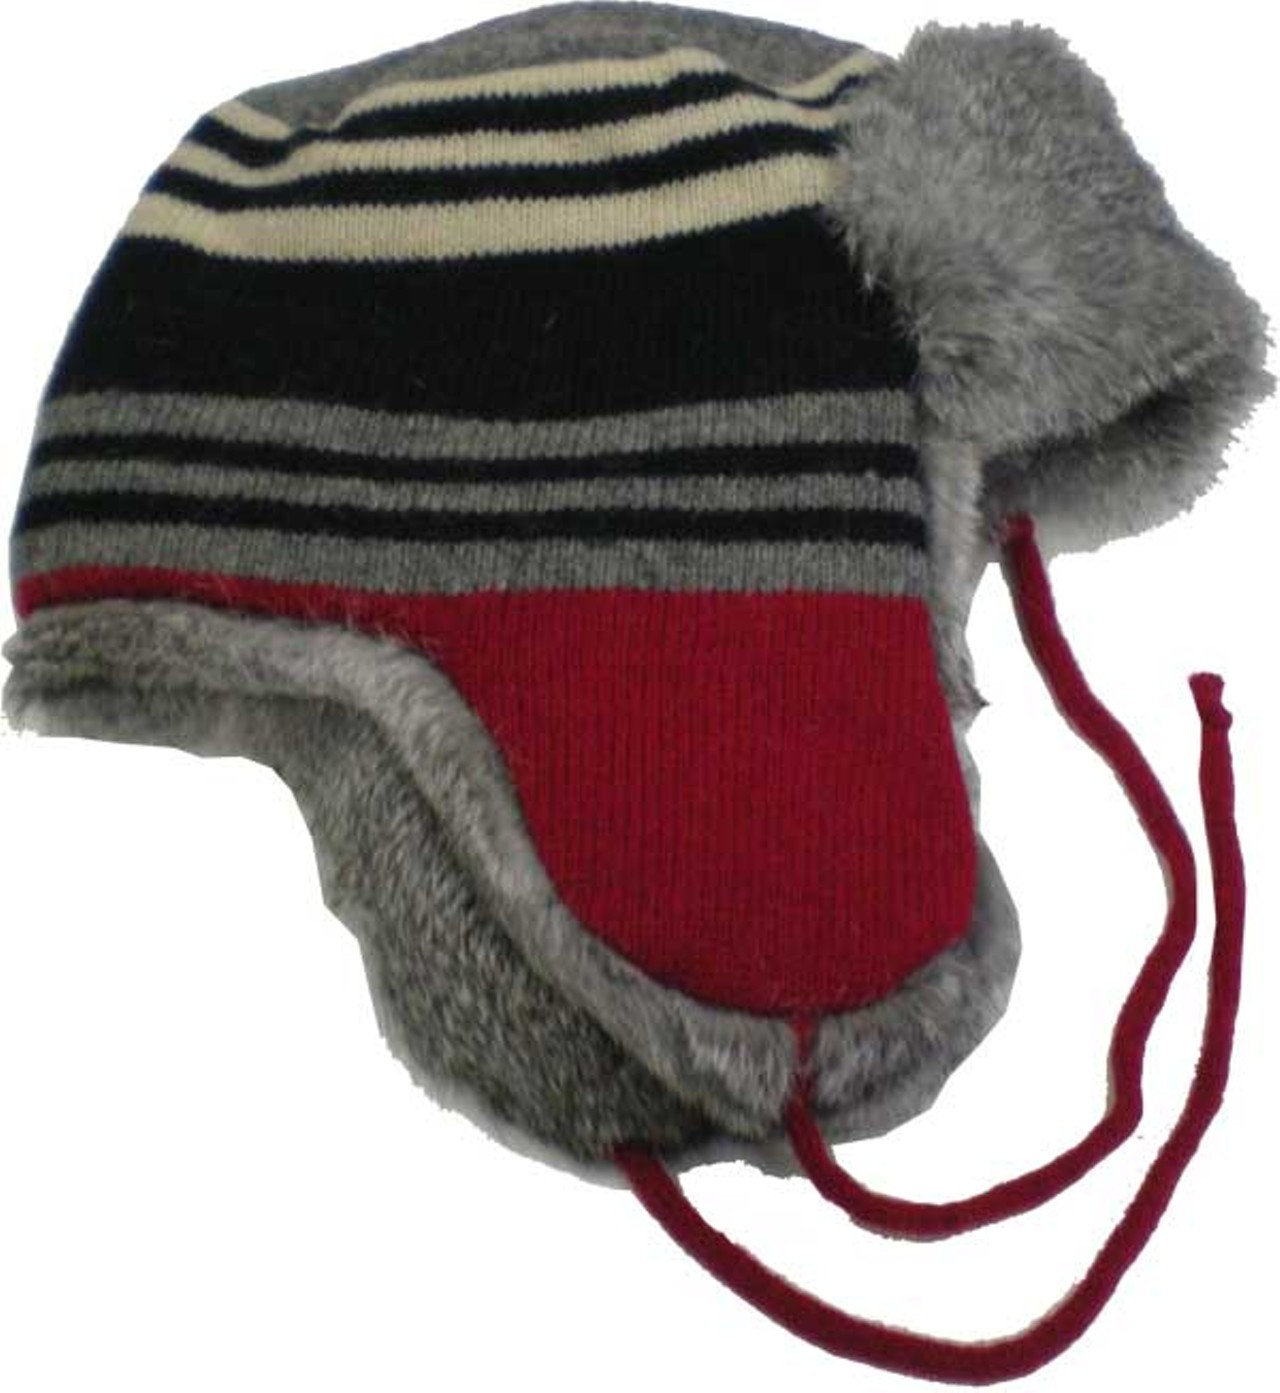 Aviator Sport Stripe -- Nothing says love like keeping your man&#146;s head warm. $75 (Henry the Hatter)